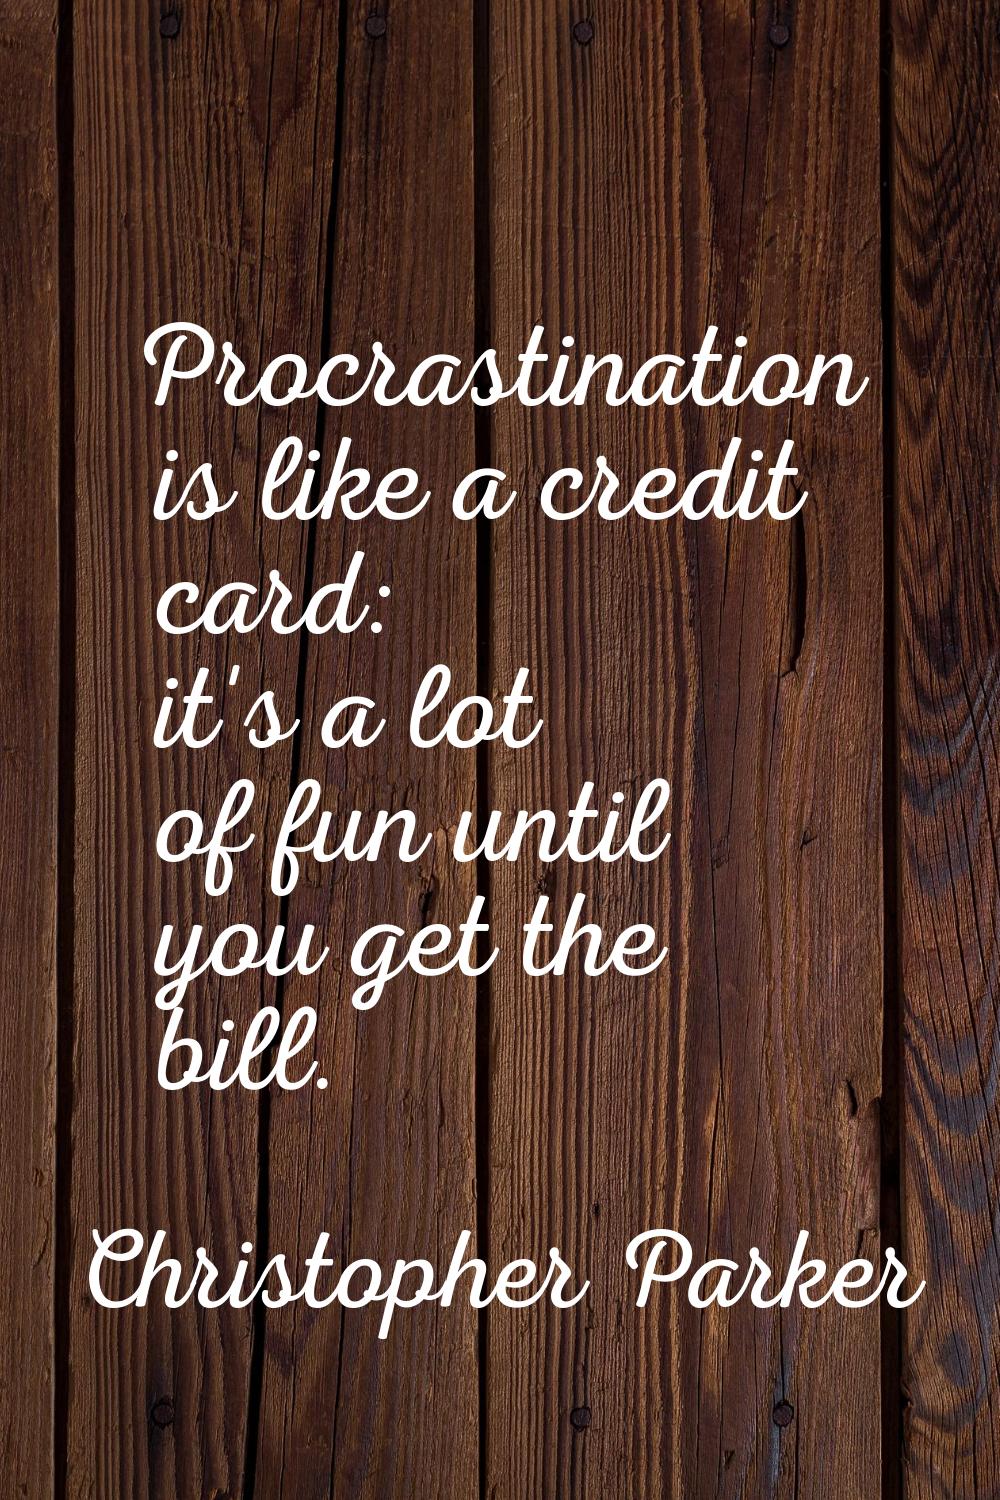 Procrastination is like a credit card: it's a lot of fun until you get the bill.